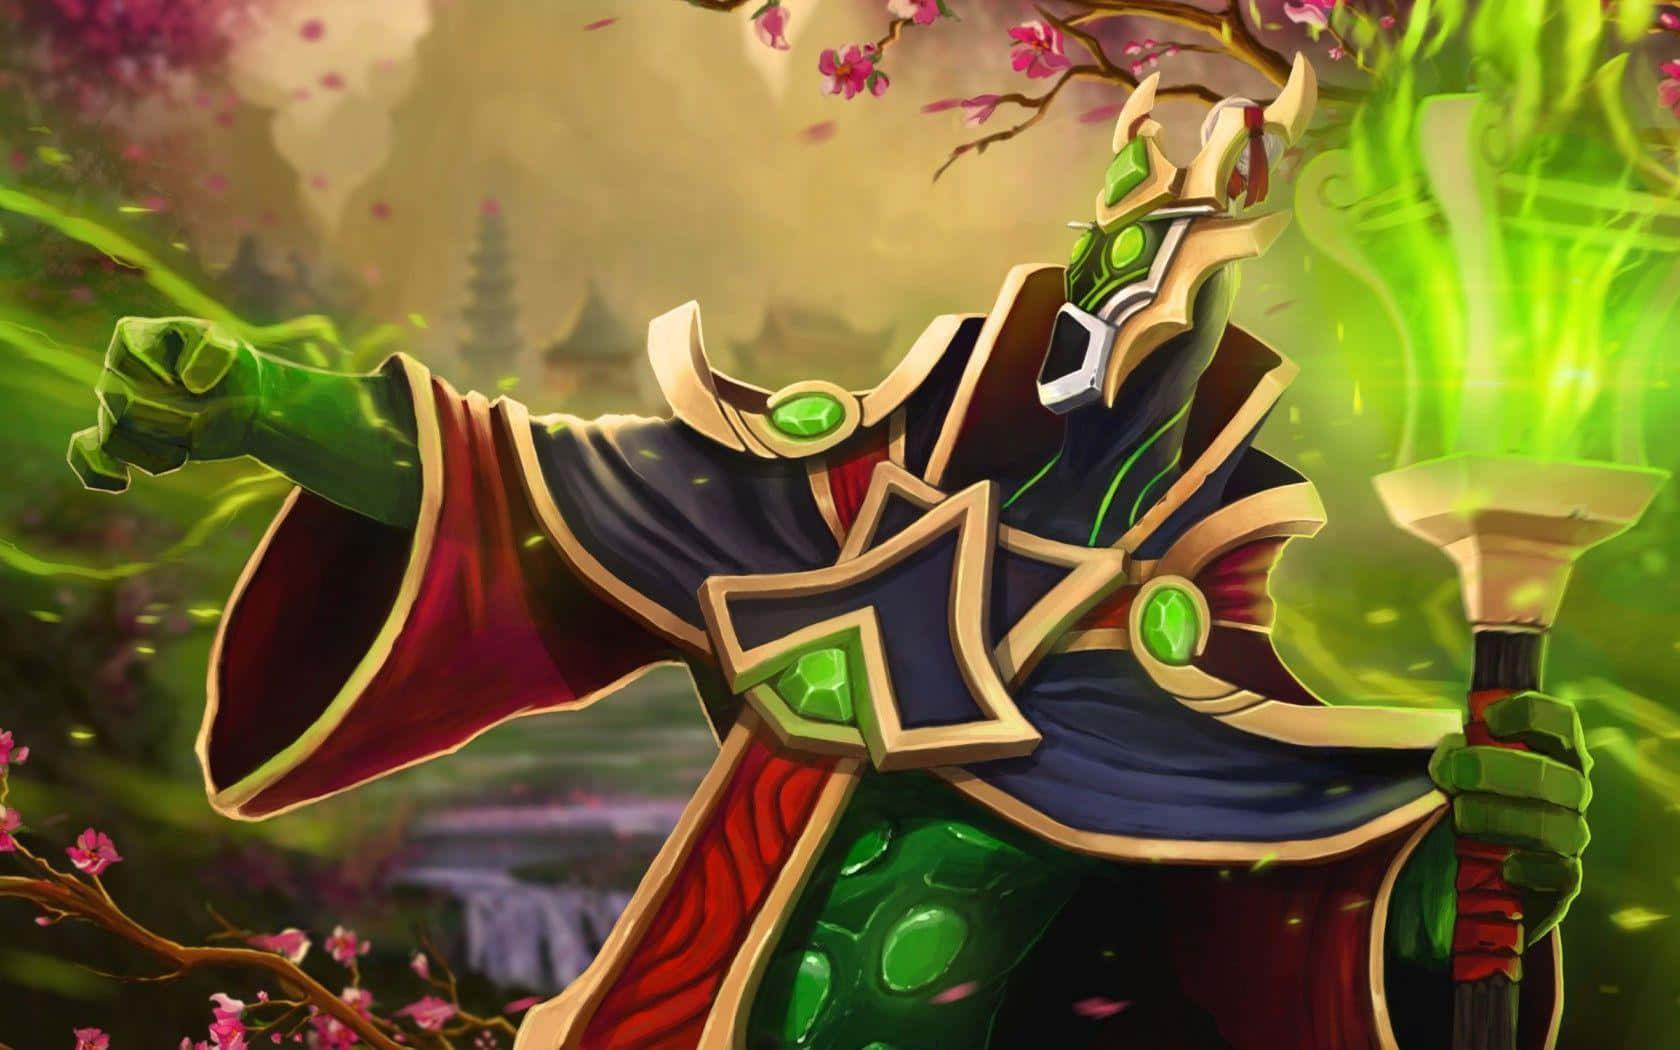 Rubick the Grand Magus casting a spell in a mystical battlefield Wallpaper